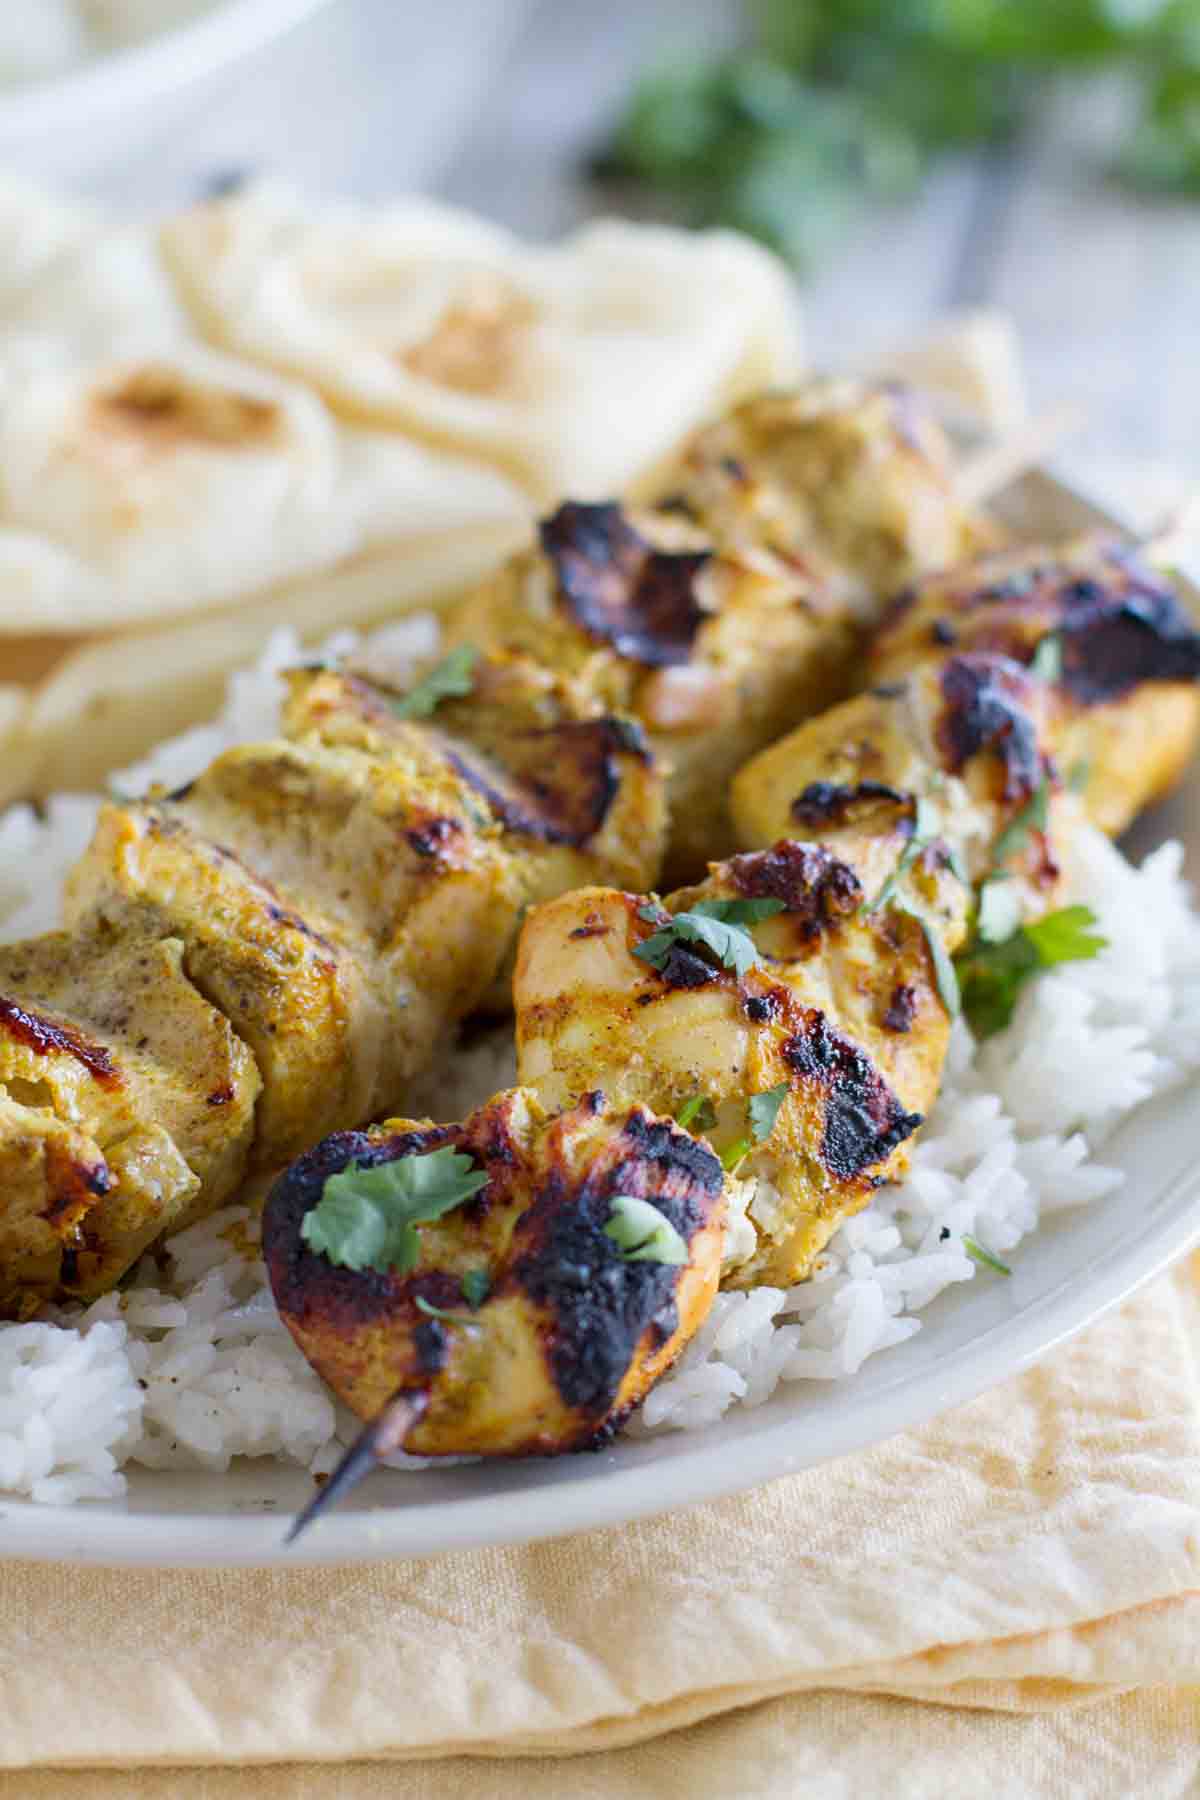 Serving of Grilled Indian Chicken Skewers over rice